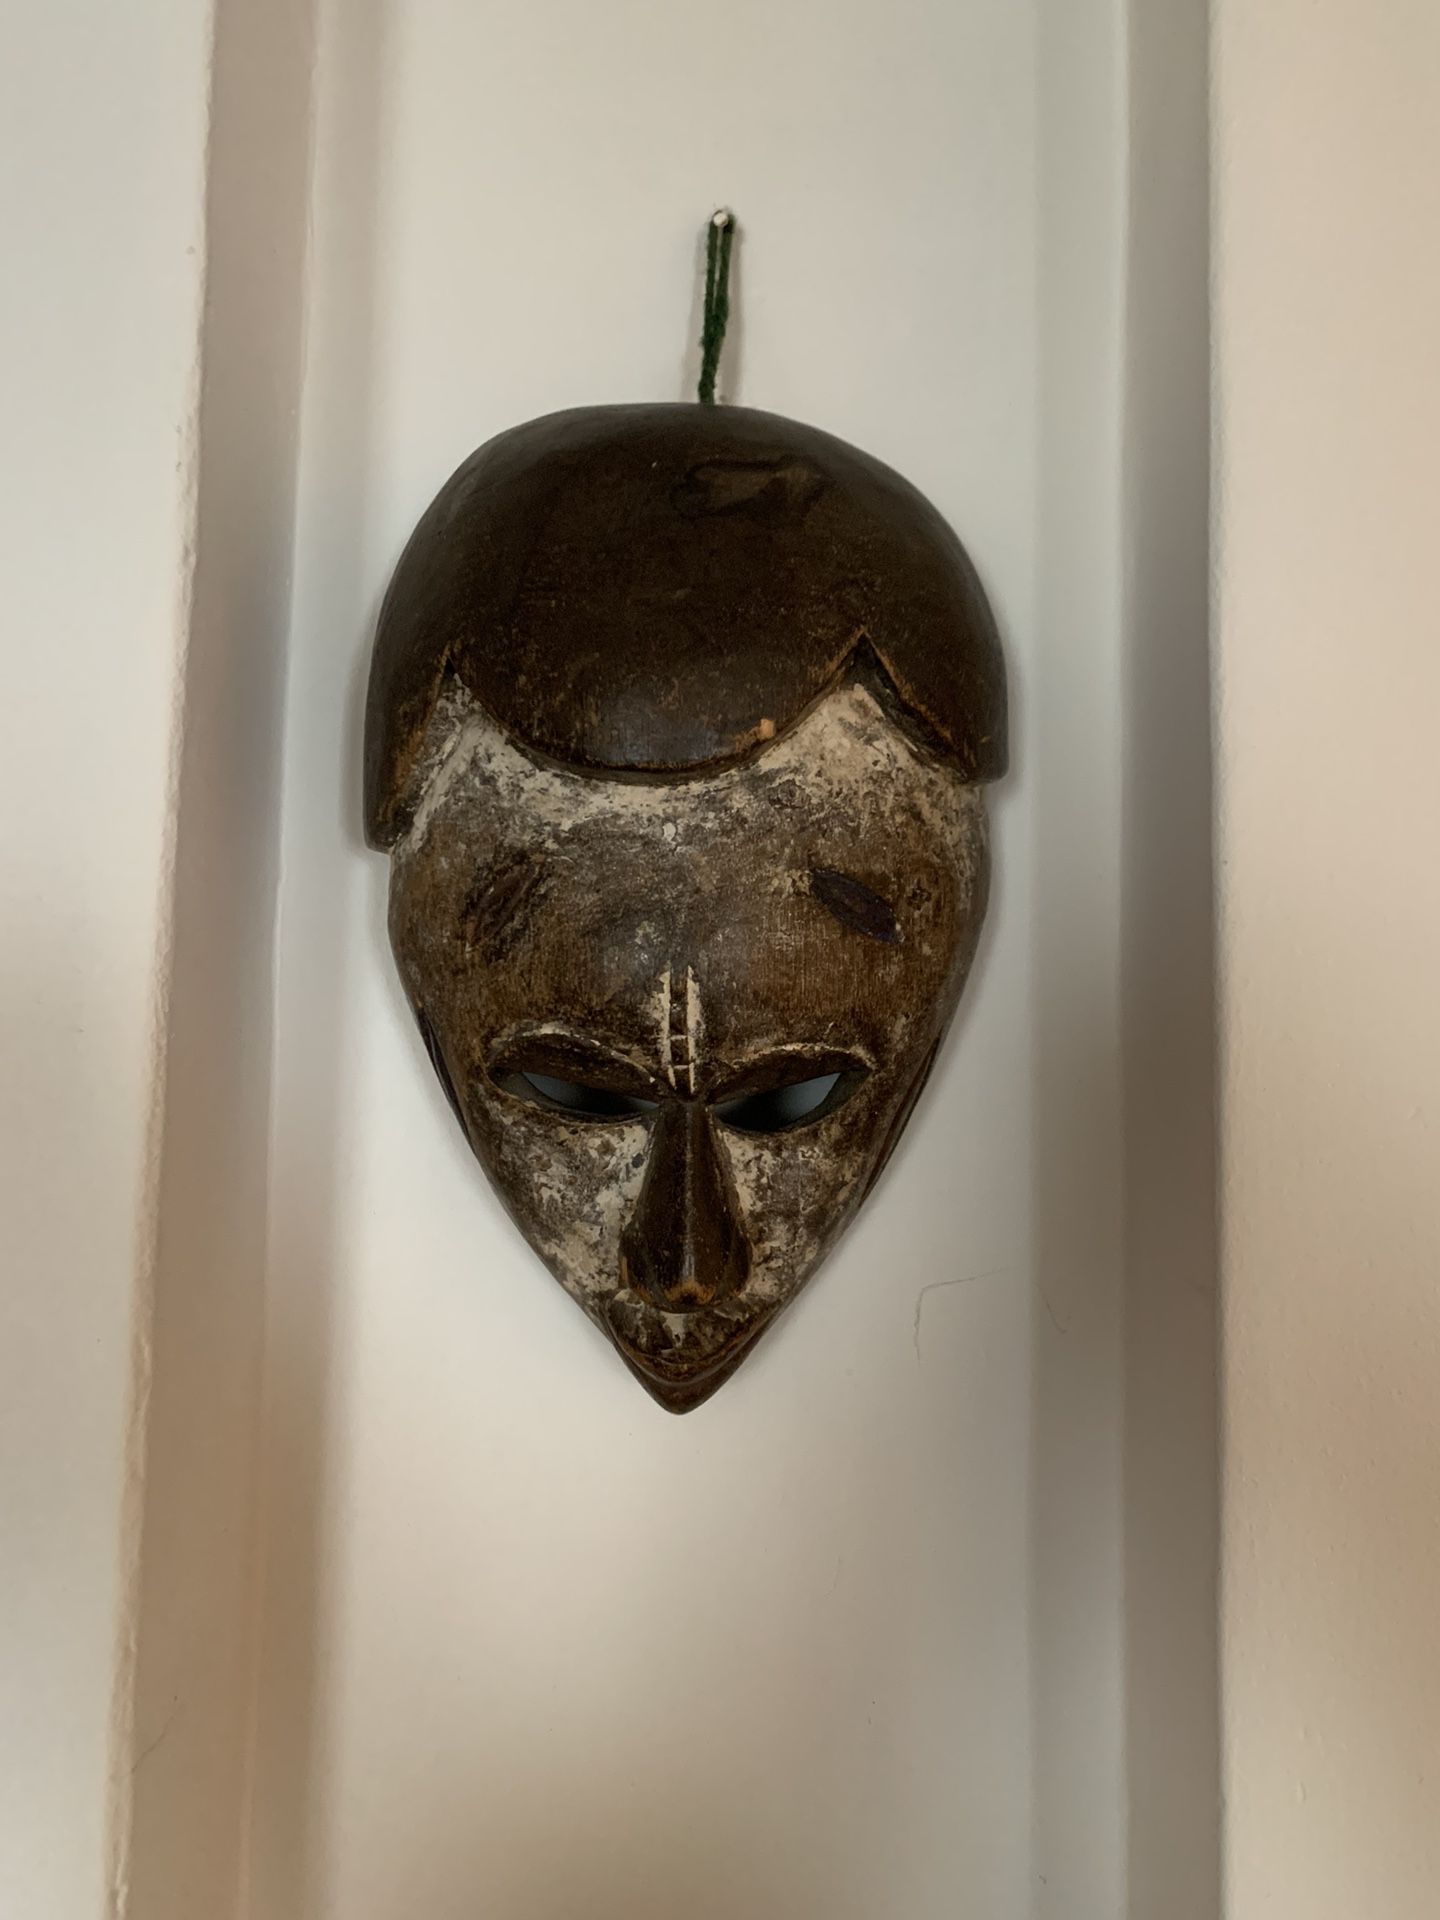 50 + Year Old African Mask